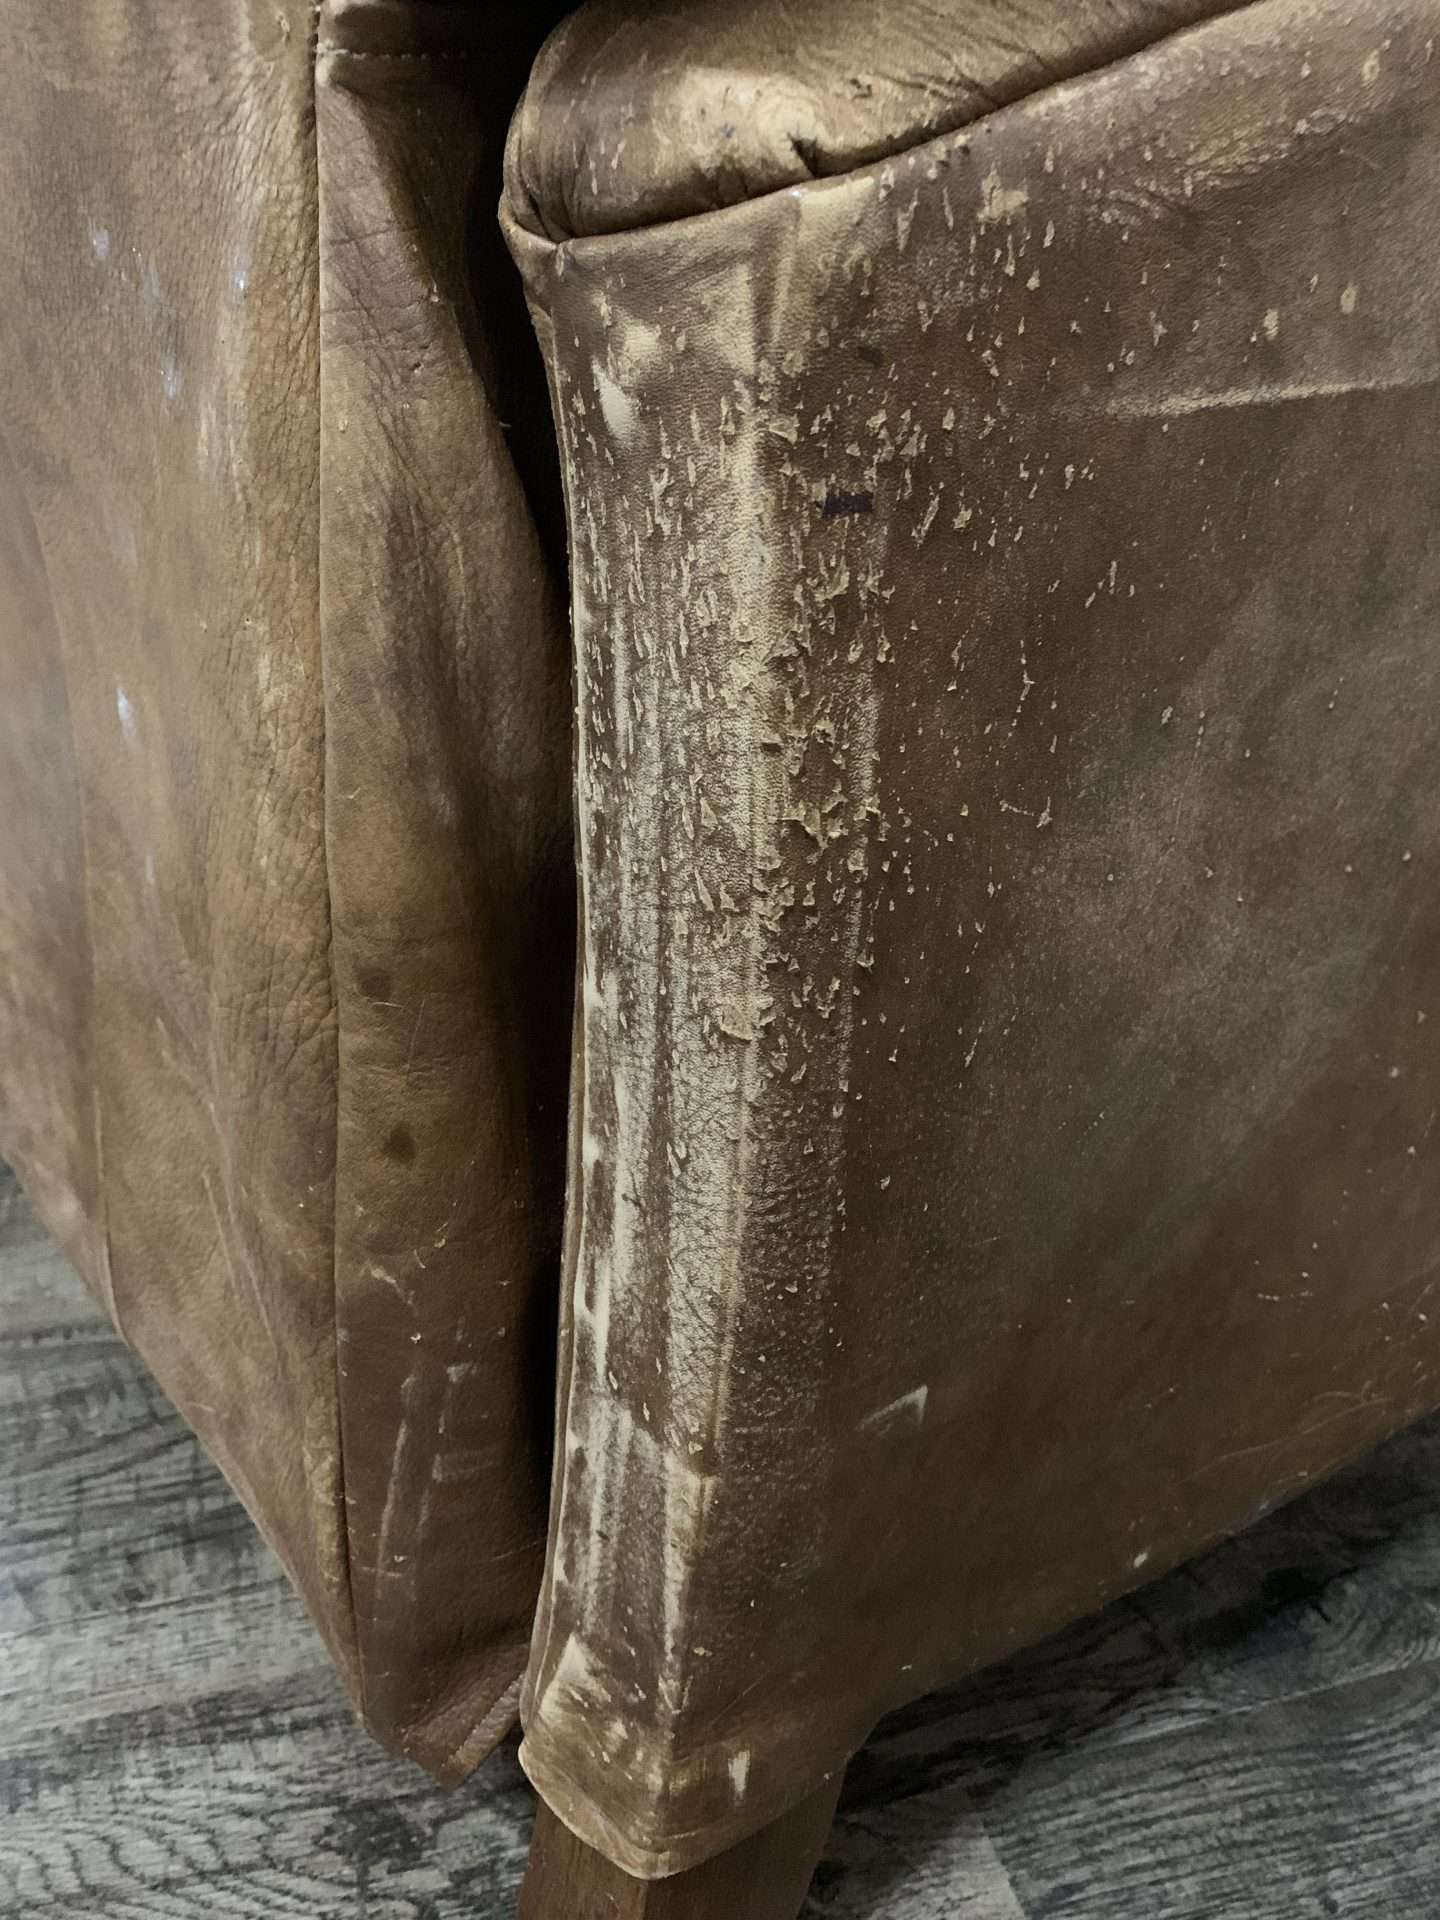 Furniture Leather How To's - Cleaning Repairing Protecting and Recolouring